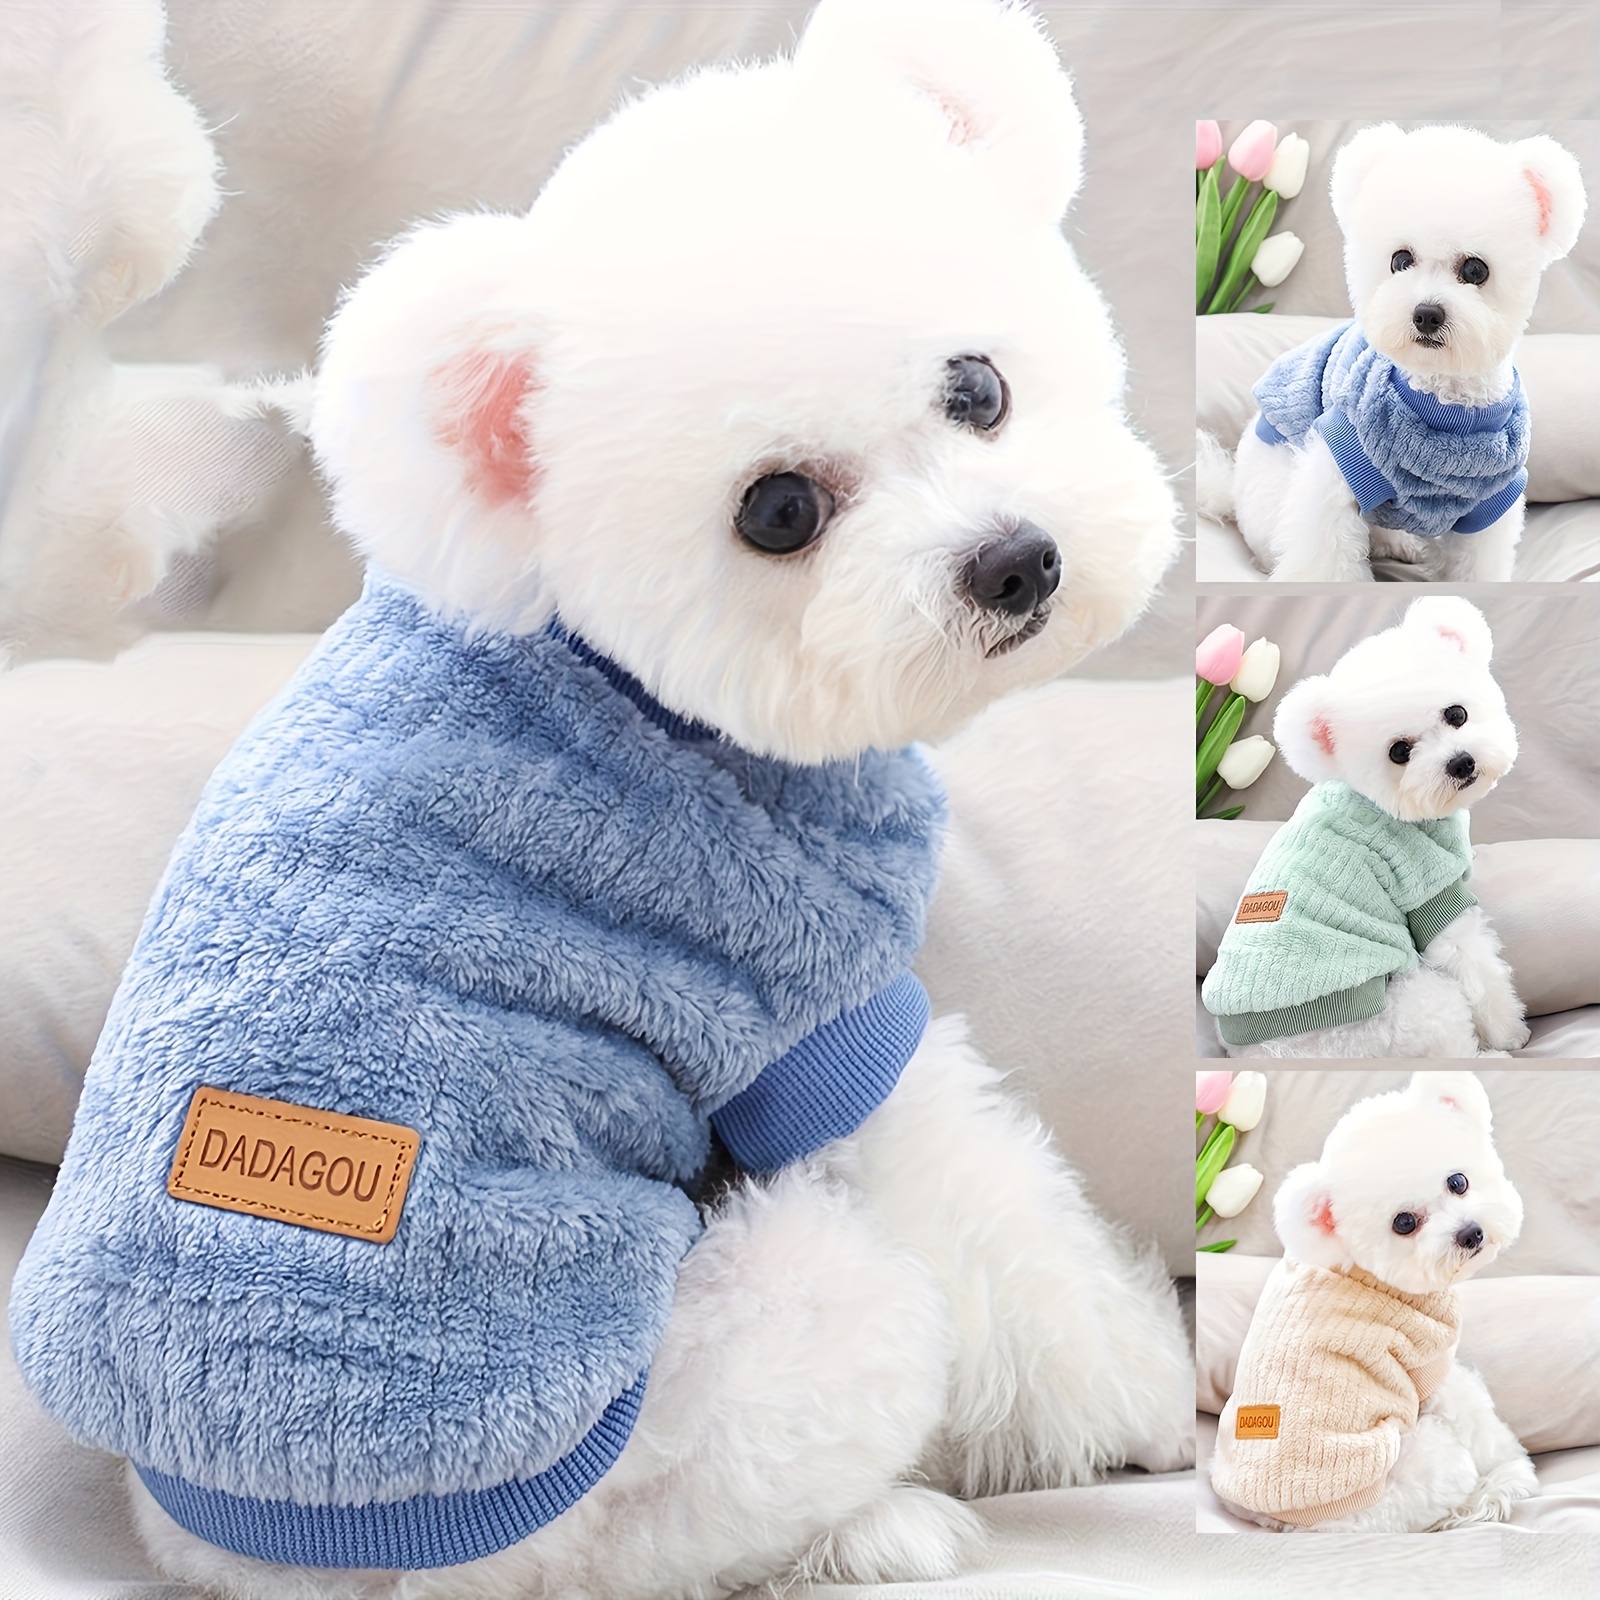 Yikeyo Fuzzy Dog Dress Dog Sweaters for Small Dogs Girl Pink Plaid Puppy  Sweatshirts Fleece Doggie Hoodie Winter Dog Clothes Female Pet Cat Pup Warm